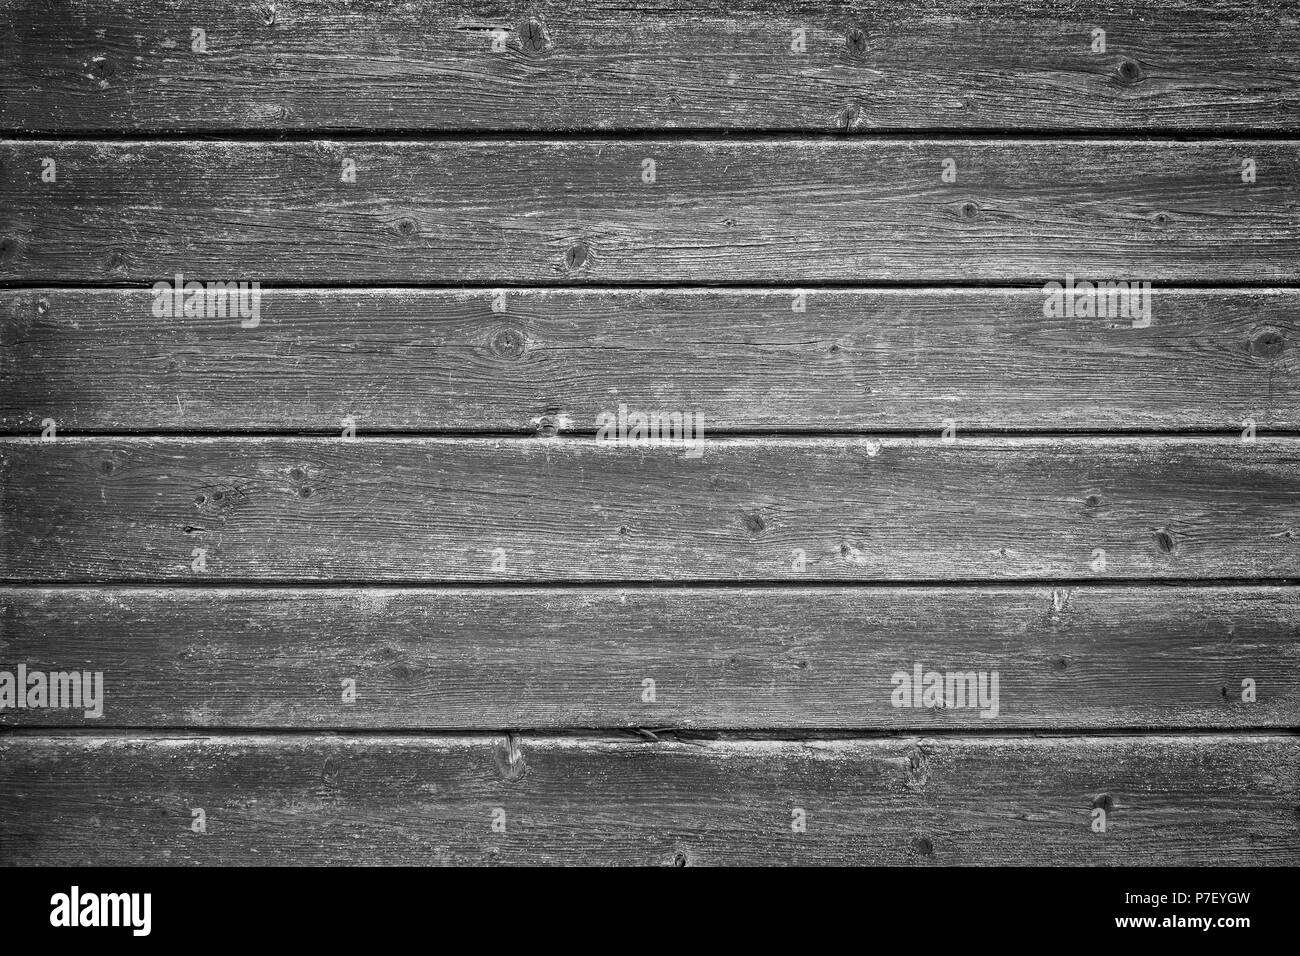 Full frame background of an old and faded wood board wall in black and white with vignette Stock Photo